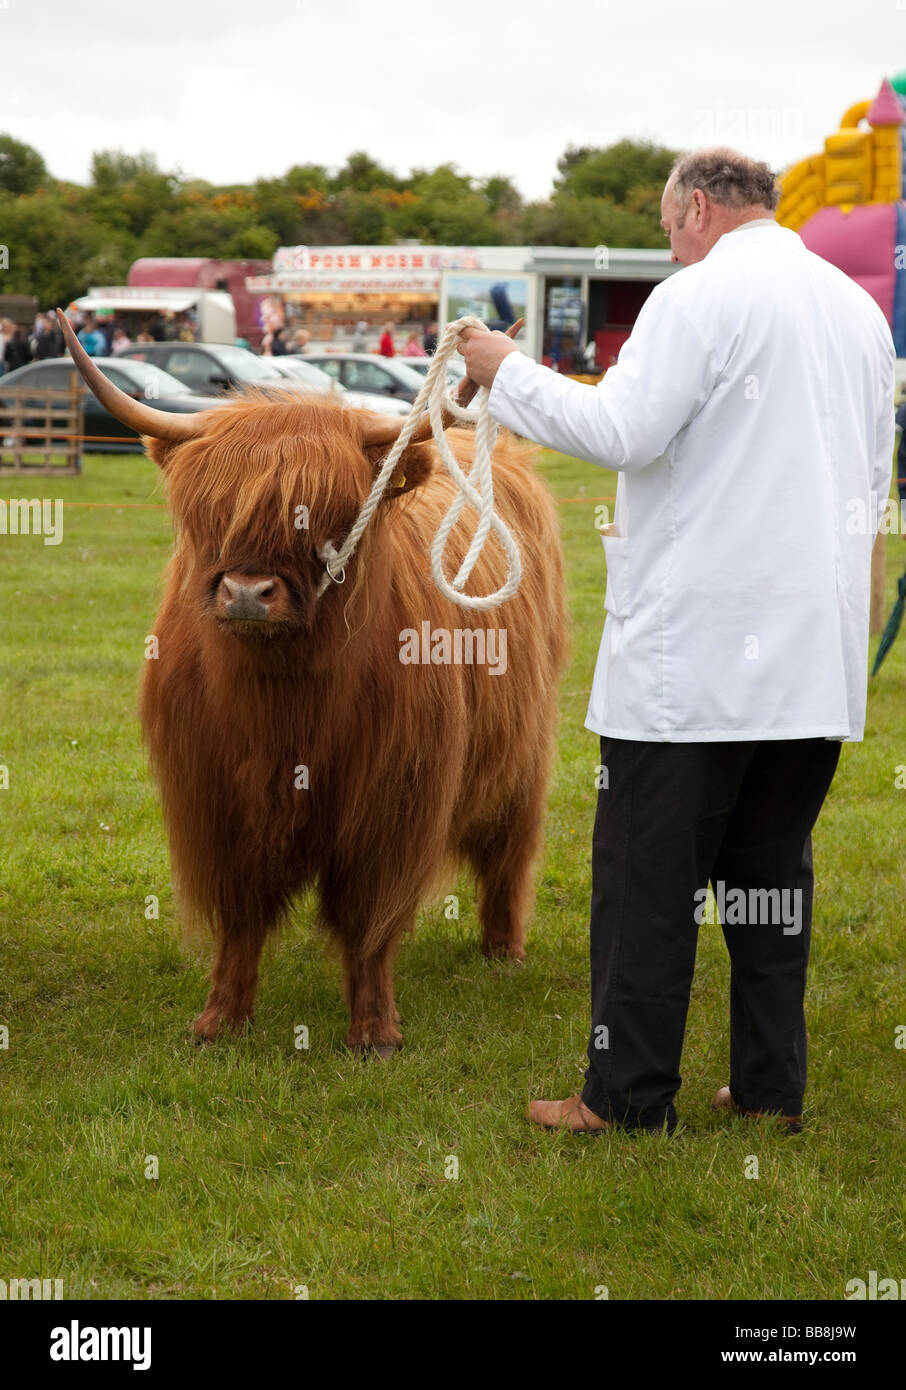 Highland cow being shown at a cattle show Stock Photo